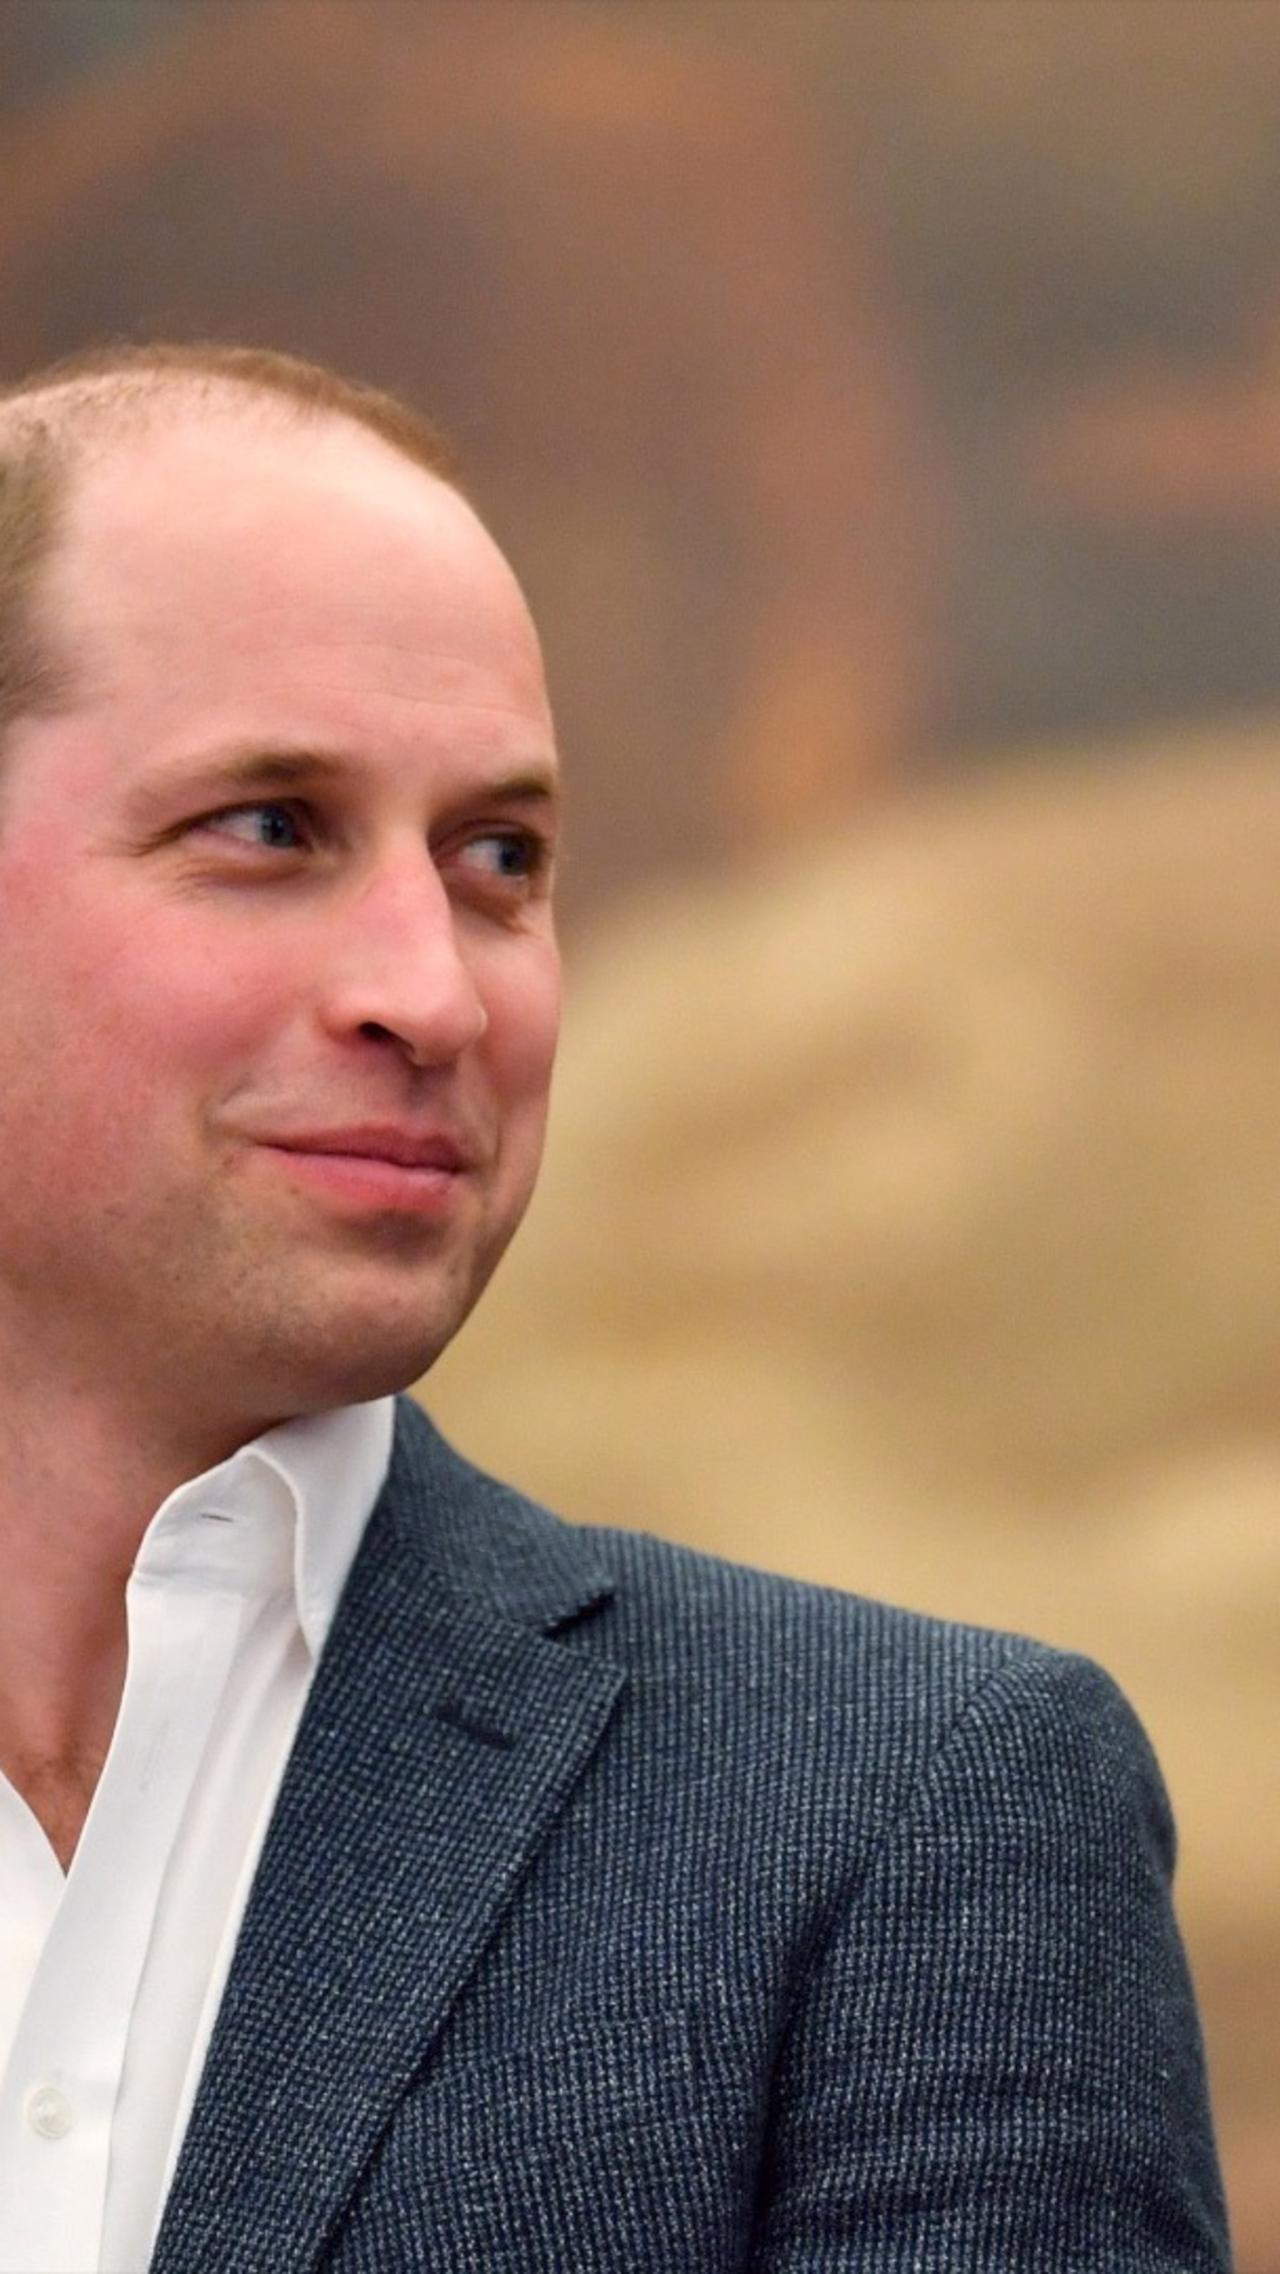 New Documentary Reveals Queen Wanted Prince William and Prince Harry to ‘Do Their Duty’